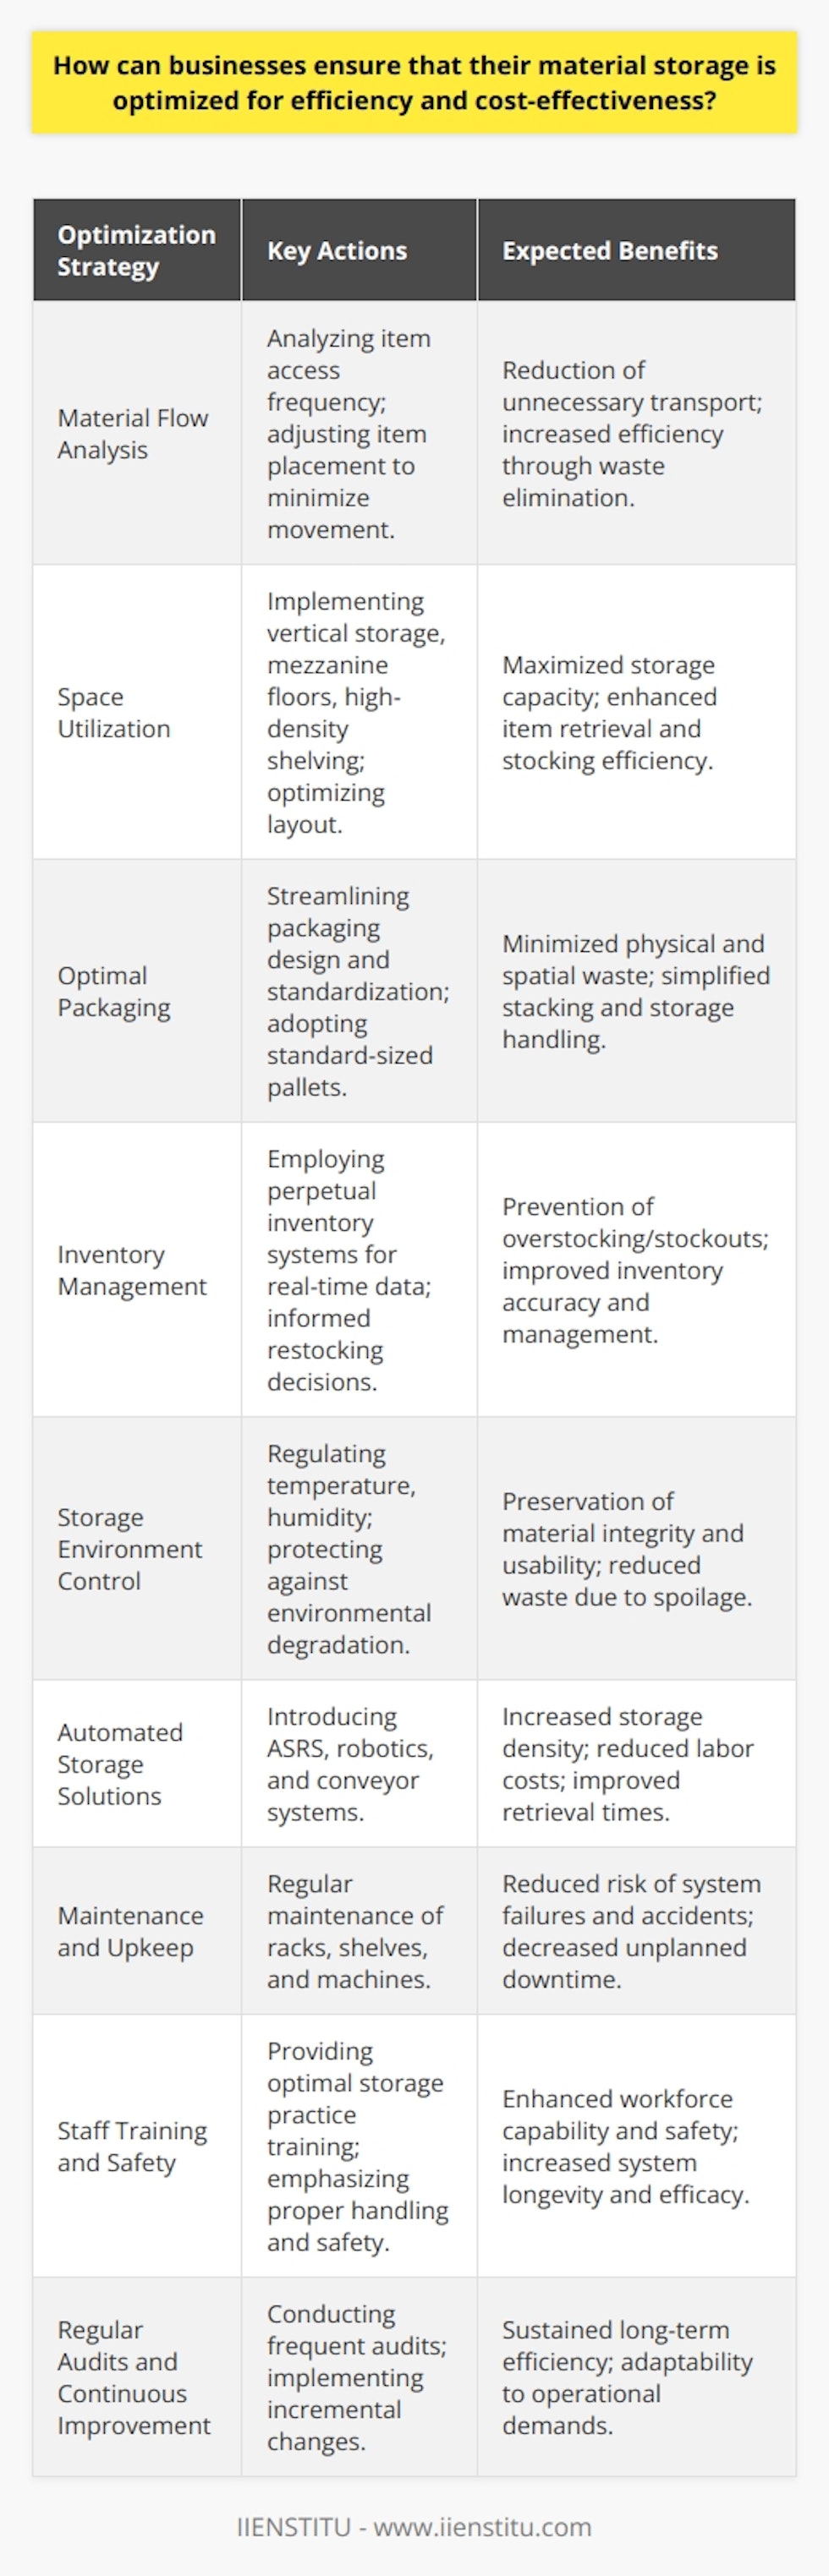 In the pursuit of operational excellence, efficient and cost-effective material storage remains a cornerstone for businesses looking to streamline processes and reduce overheads. Achieving this requires a strategic approach to handling, allocating, and managing resources. Here are some pivotal steps to optimize material storage for enhanced efficiency and cost savings:1. Material Flow Analysis: Understanding the flow of materials within the facility is vital. Conduct a thorough analysis of which items are accessed most frequently and adjust their placement to minimize movement. This approach is informed by the principle of lean management wherein reducing waste in all forms, including unnecessary transport, contributes to efficiency.2. Space Utilization: Maximizing available storage space requires a creative and intelligent layout. Consider vertical storage solutions that leverage height over floor space. Utilize mezzanine floors where applicable, install high-density shelving systems, and ensure that the warehouse layout is conducive to efficient item retrieval and stocking.3. Optimal Packaging: The design and standardization of packaging significantly influence storage configurations. Streamlined packaging that protects material integrity while fitting efficiently into allocated spaces can minimize both physical waste and spatial inefficiency. Additionally, investing in standard-sized pallets simplifies stacking and storage calculations.4. Inventory Management: Implementing robust inventory management systems is non-negotiable. A perpetual inventory system that offers real-time data on stock levels and locations helps prevent overstocking and stockouts. It also aids in making informed decisions on when to reorder and how to adjust storage.5. Storage Environment Control: For businesses dealing with perishable or sensitive materials, controlling the storage environment is crucial. This includes temperature regulation, humidity control, and preventing exposure to environmental factors that could degrade the quality or usability of stored materials.6. Automated Storage Solutions: Where feasible, integrating automated storage and retrieval systems (ASRS) may bring transformative benefits. These systems can radically increase storage density, reduce labor costs, and improve retrieval times. Robotics and conveyor systems can also be integrated to automate the movement of materials within the storage facility.7. Maintenance and Upkeep: Ensuring that storage systems are well-maintained is essential. A routine maintenance protocol keeps racks, shelves, and machines in good working condition, reducing the risk of accidents, system failures, and unplanned downtime.8. Staff Training and Safety: Employees should be trained in optimal storage practices, including proper handling and stacking techniques, usage of equipment, and safety protocols. Empowering the workforce with knowledge and skills is one of the most effective ways to ensure the longevity and efficacy of an optimized storage system.9. Regular Audits and Continuous Improvement: Frequent audits of material storage practices and inventory accuracy can highlight inefficiencies and areas for improvement. By continuously seeking and implementing small incremental changes, a business can sustain long-term efficiency and adapt to the dynamic demands of its operations.In closing, businesses should not only implement these strategies but also routinely evaluate their storage methodologies and adapt as necessary. As IIENSTITU highlights through its various professional development programs, the continual assessment of operational systems is vital in maintaining a competitive edge. By being proactive and forward-thinking in their material storage strategies, companies can reap significant efficiencies and cost savings.